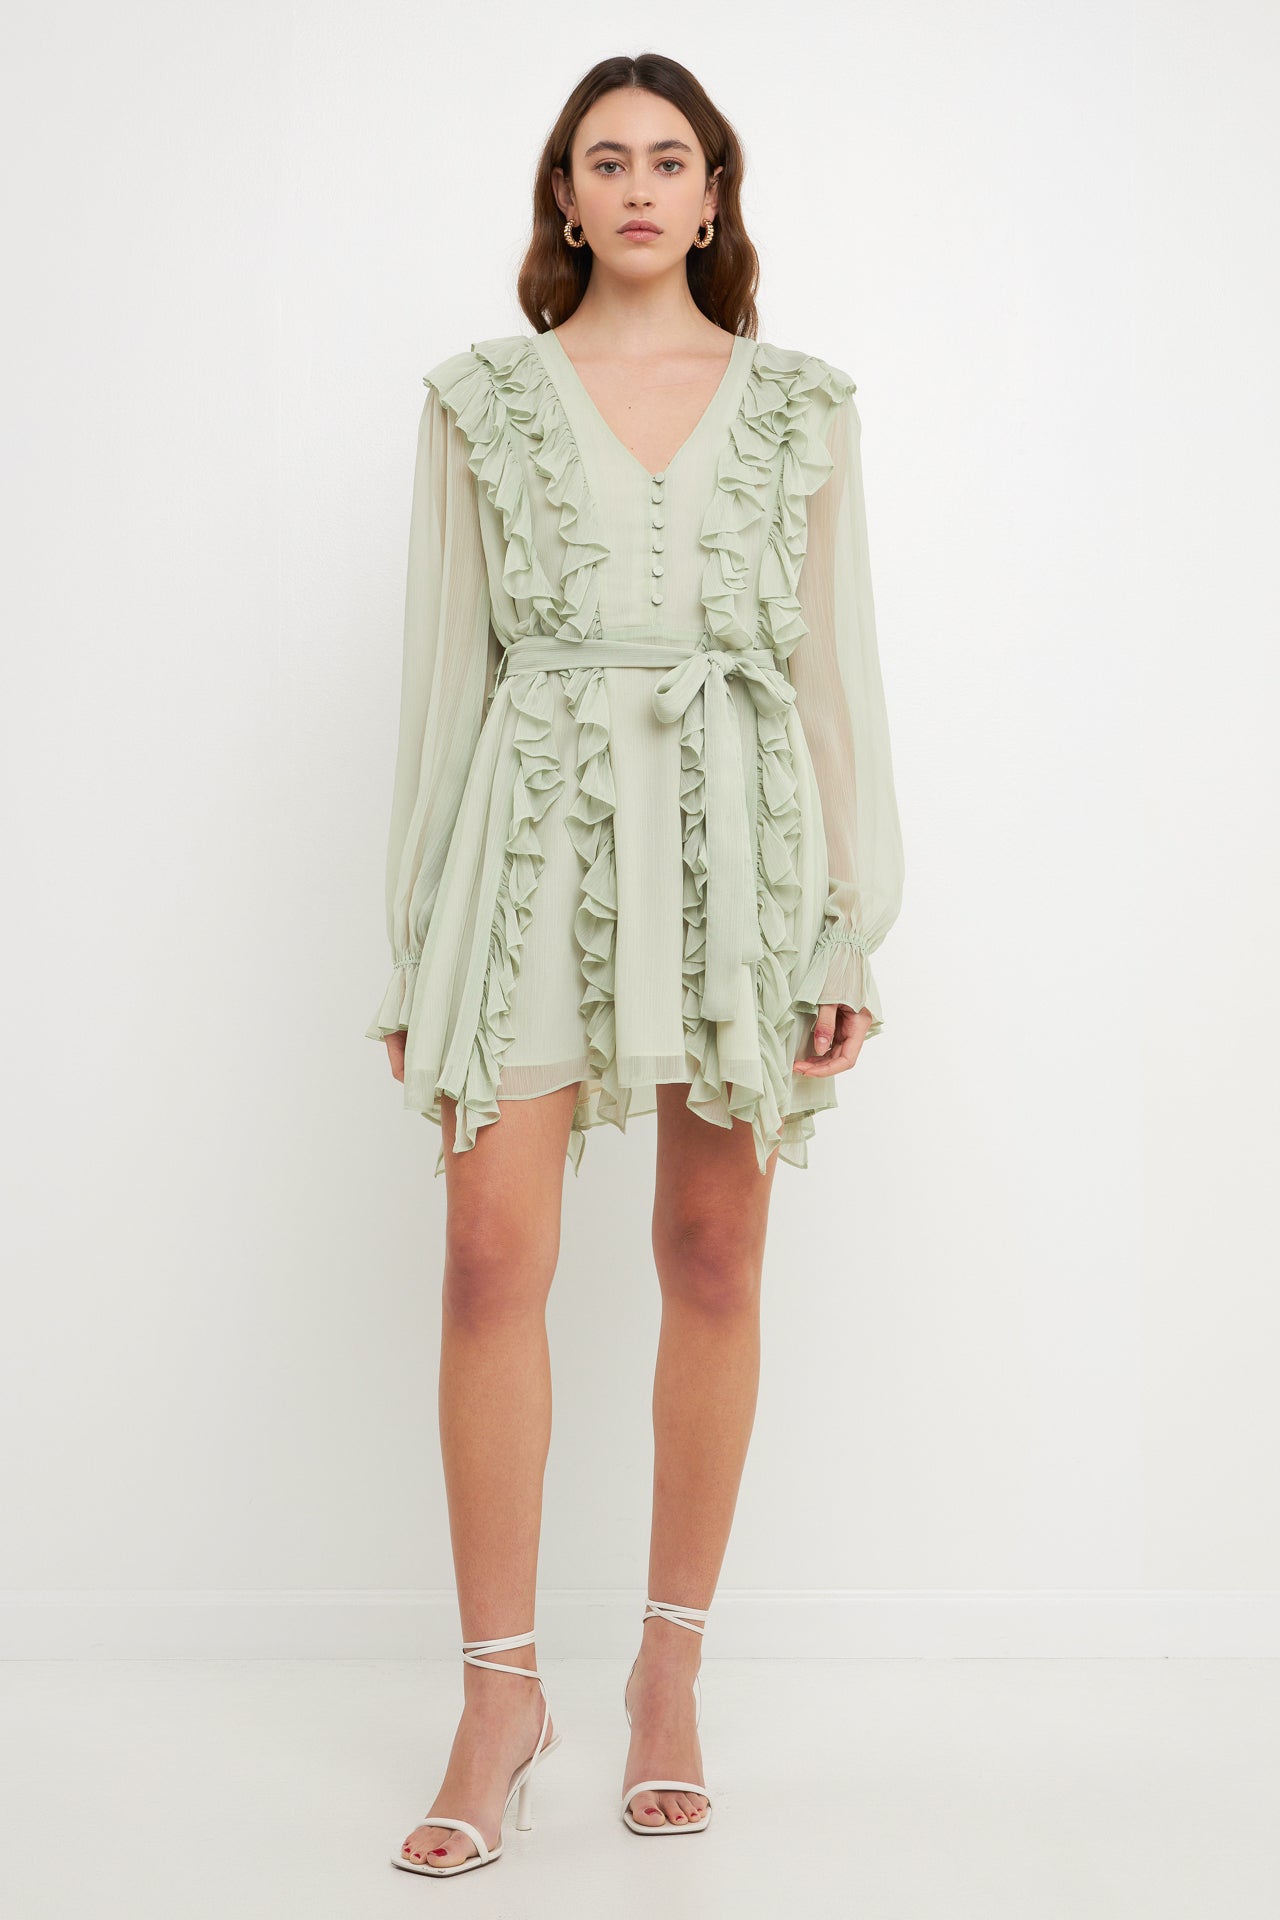 ENDLESS ROSE - Button Down Ruffle Mini Dress - DRESSES available at Objectrare